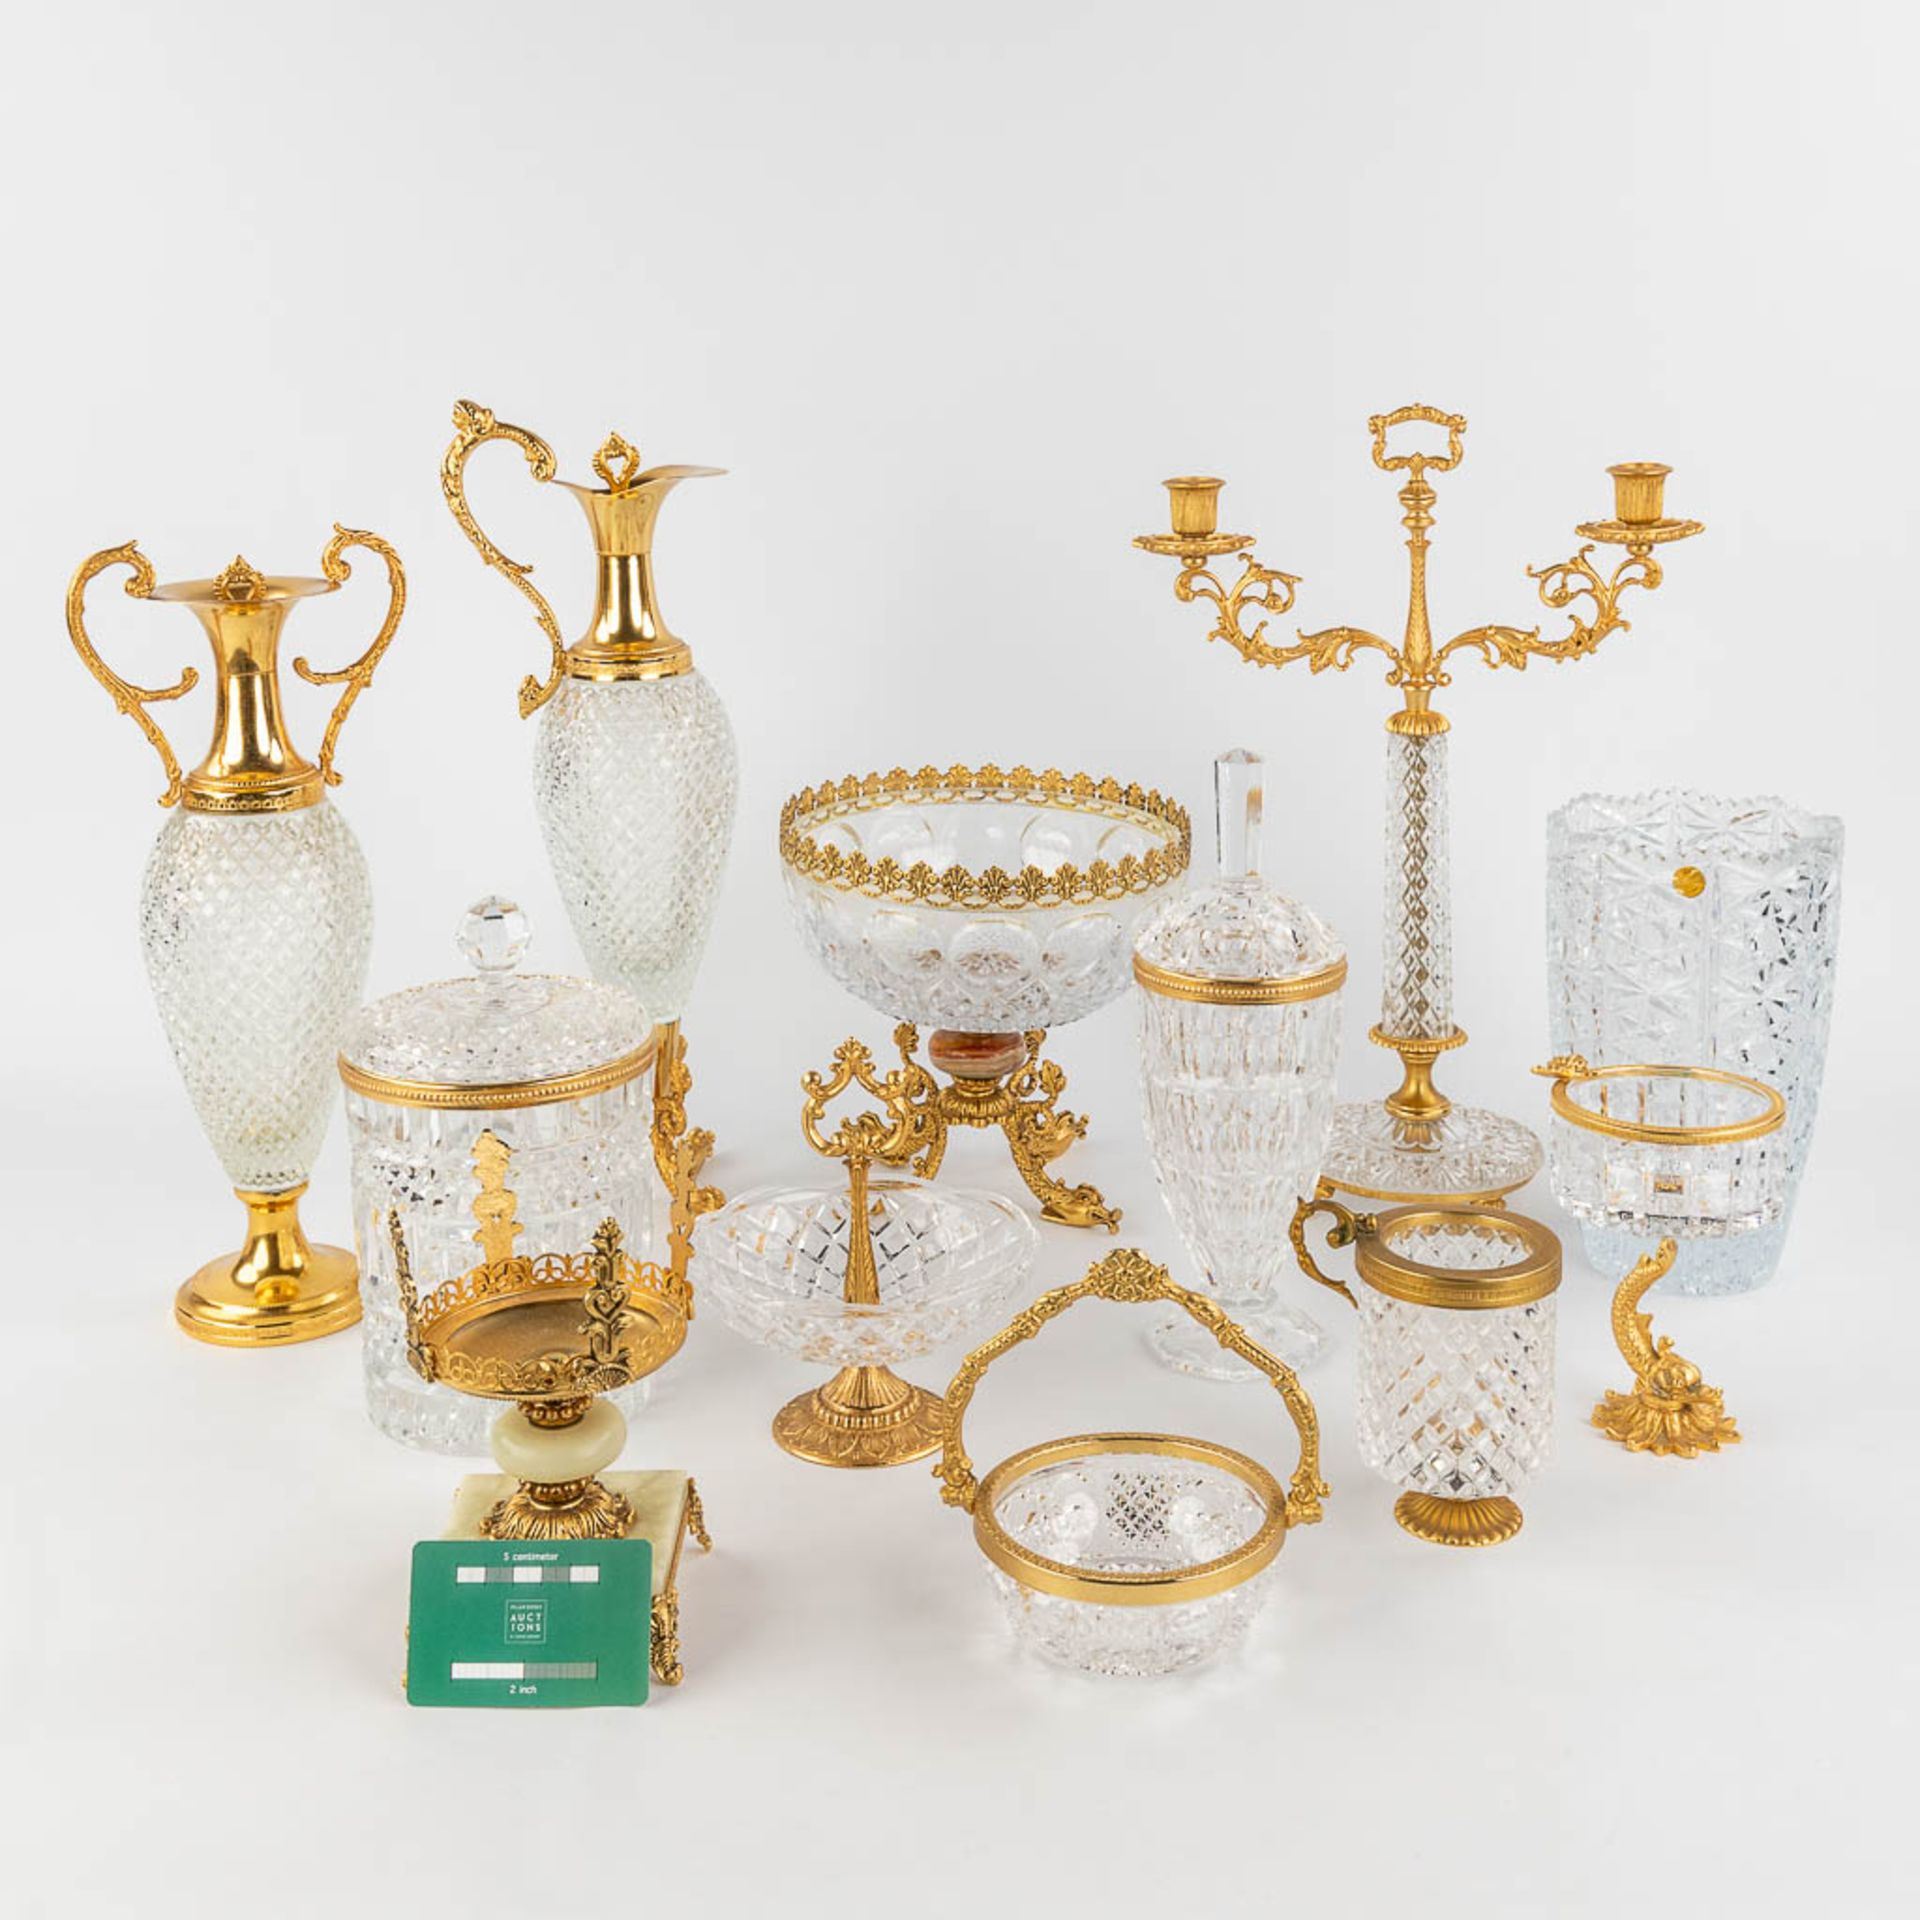 A collection of 11 pieces of Bohemian glass with a metal rim. (L: 13,5 x W: 28,5 x H: 42,5 cm) - Image 2 of 22